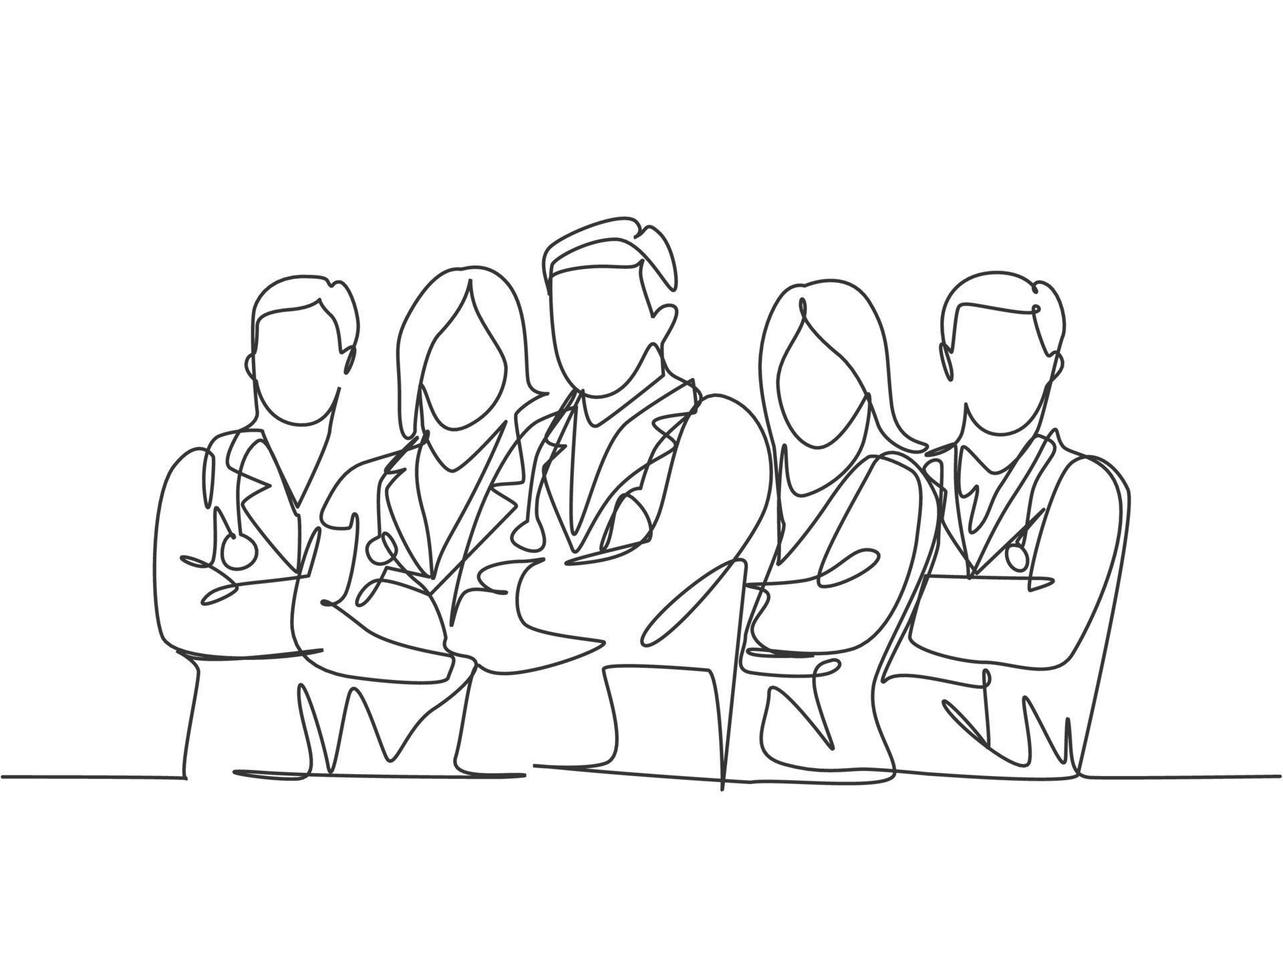 One single line drawing of group of male doctor and female doctor line up to celebrate their successful surgery operation. Team work success concept continuous line draw design vector illustration